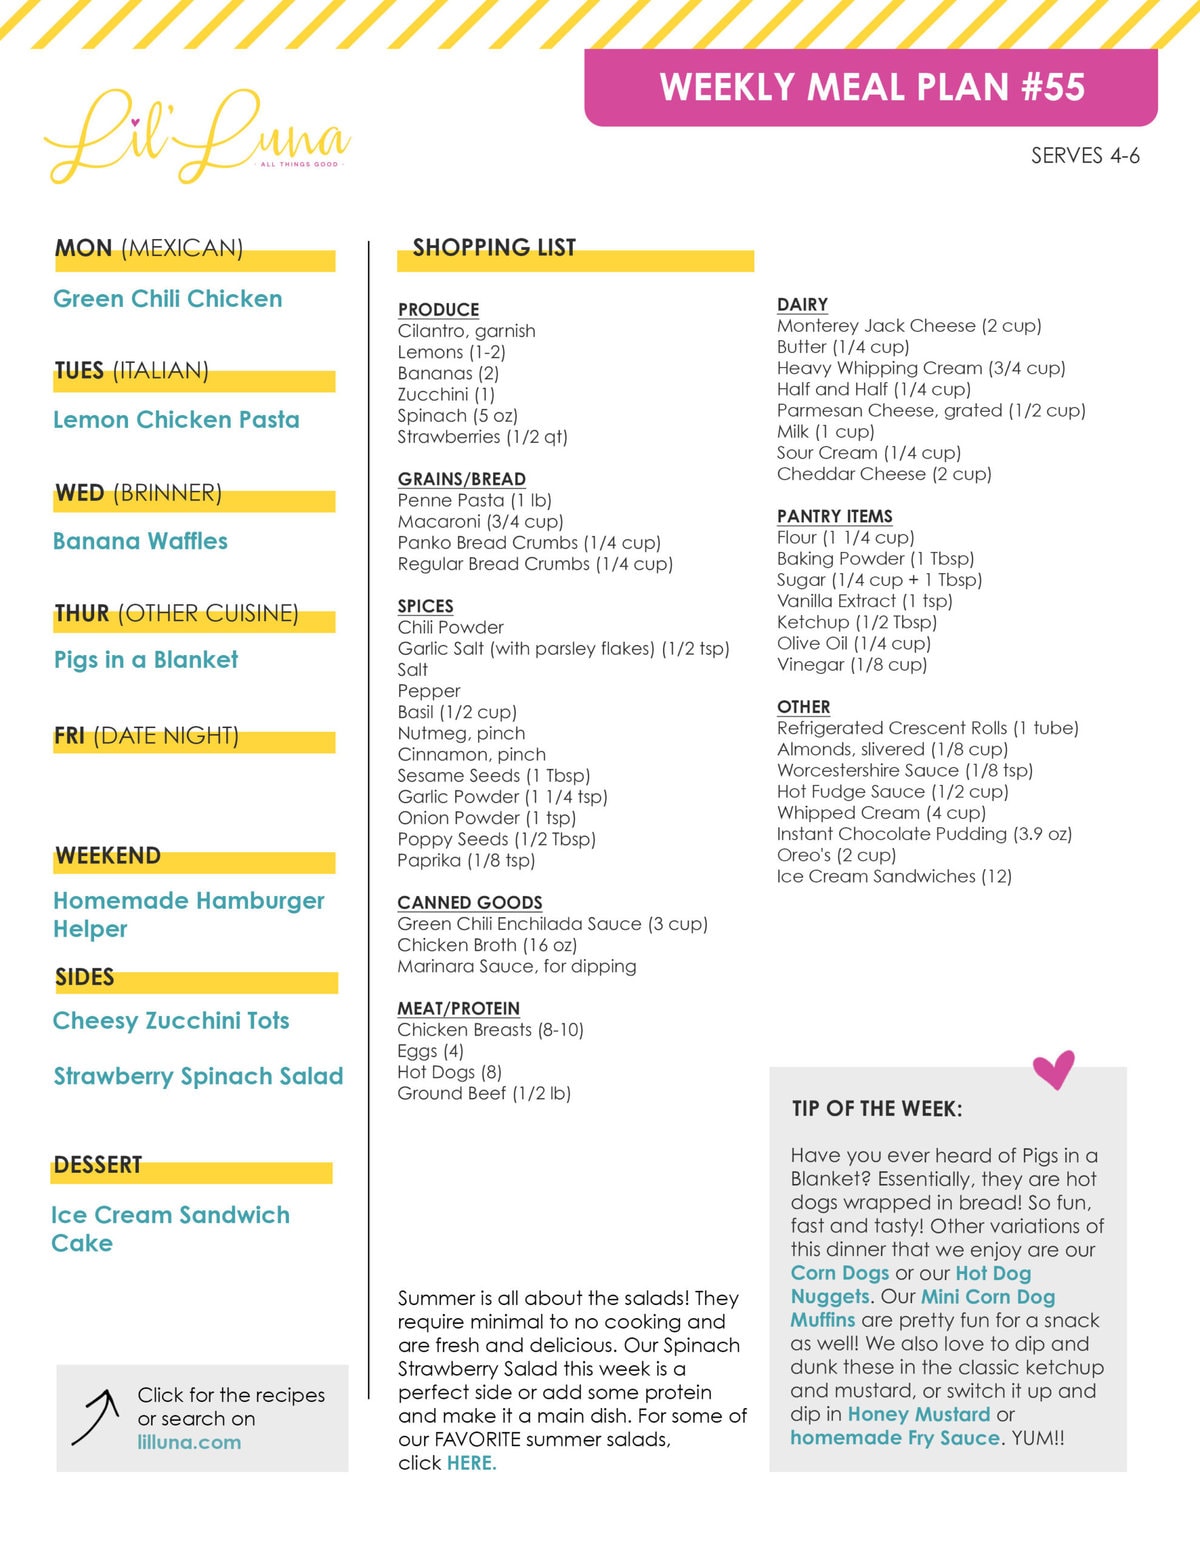 Printable version of Meal Plan #55 with grocery list.